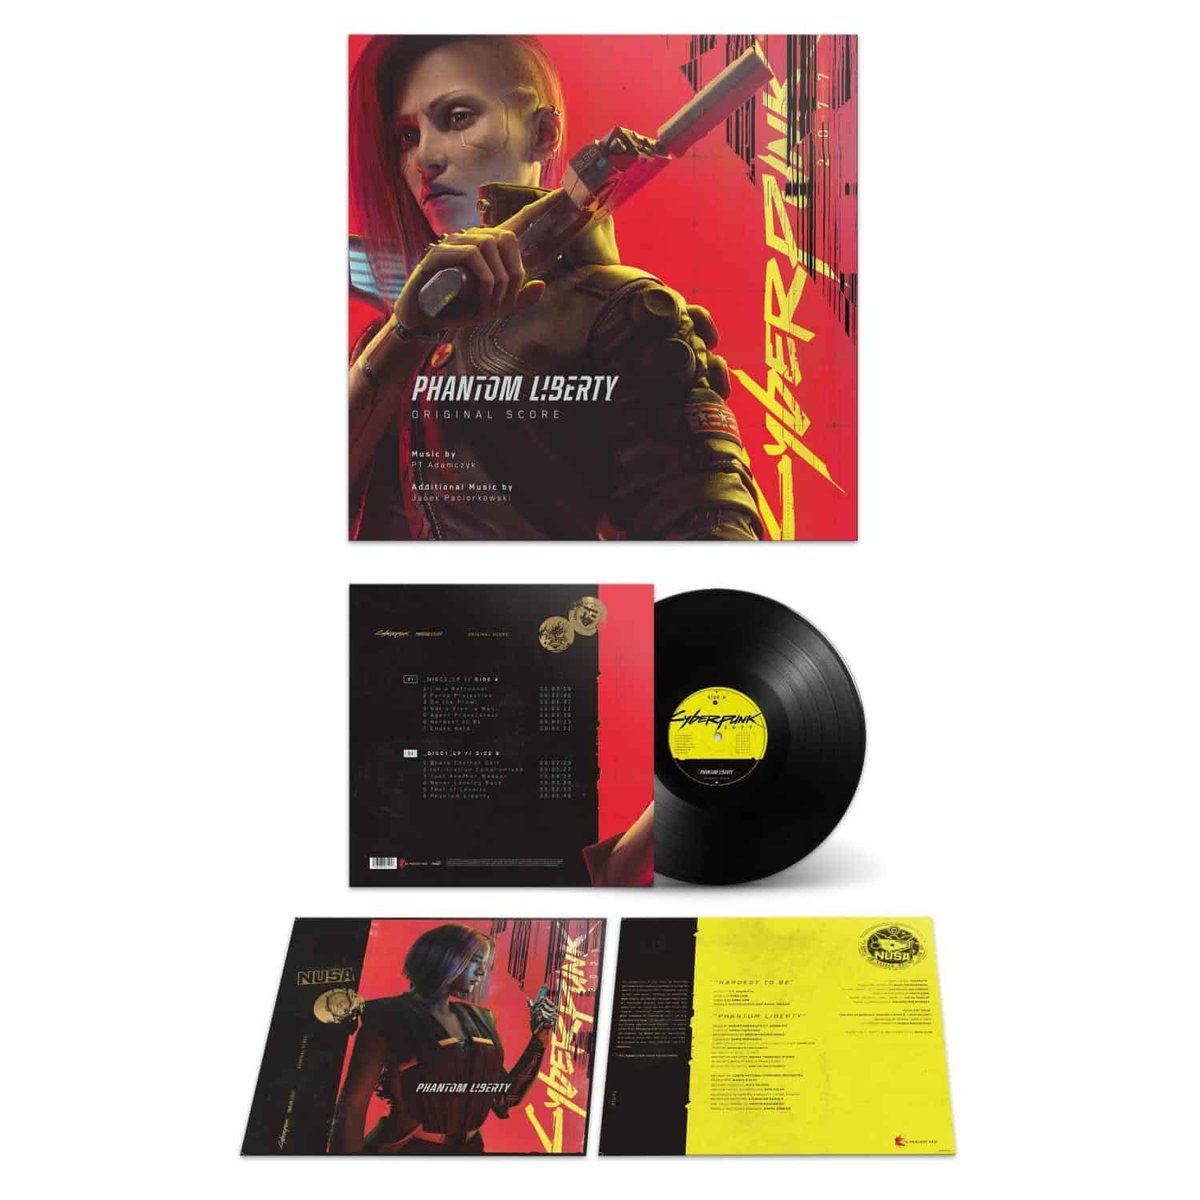 JUST IN! 'Cyberpunk 2077: Phantom Liberty (Original Score)' by P.T. Adamczyk and Jacek Paciorkowski The pair of Polish musicians provide a suitably futuristic electronic and industrial-tinged score to the expansion of the open world game. @MilanRecLabel normanrecords.com/records/202984…